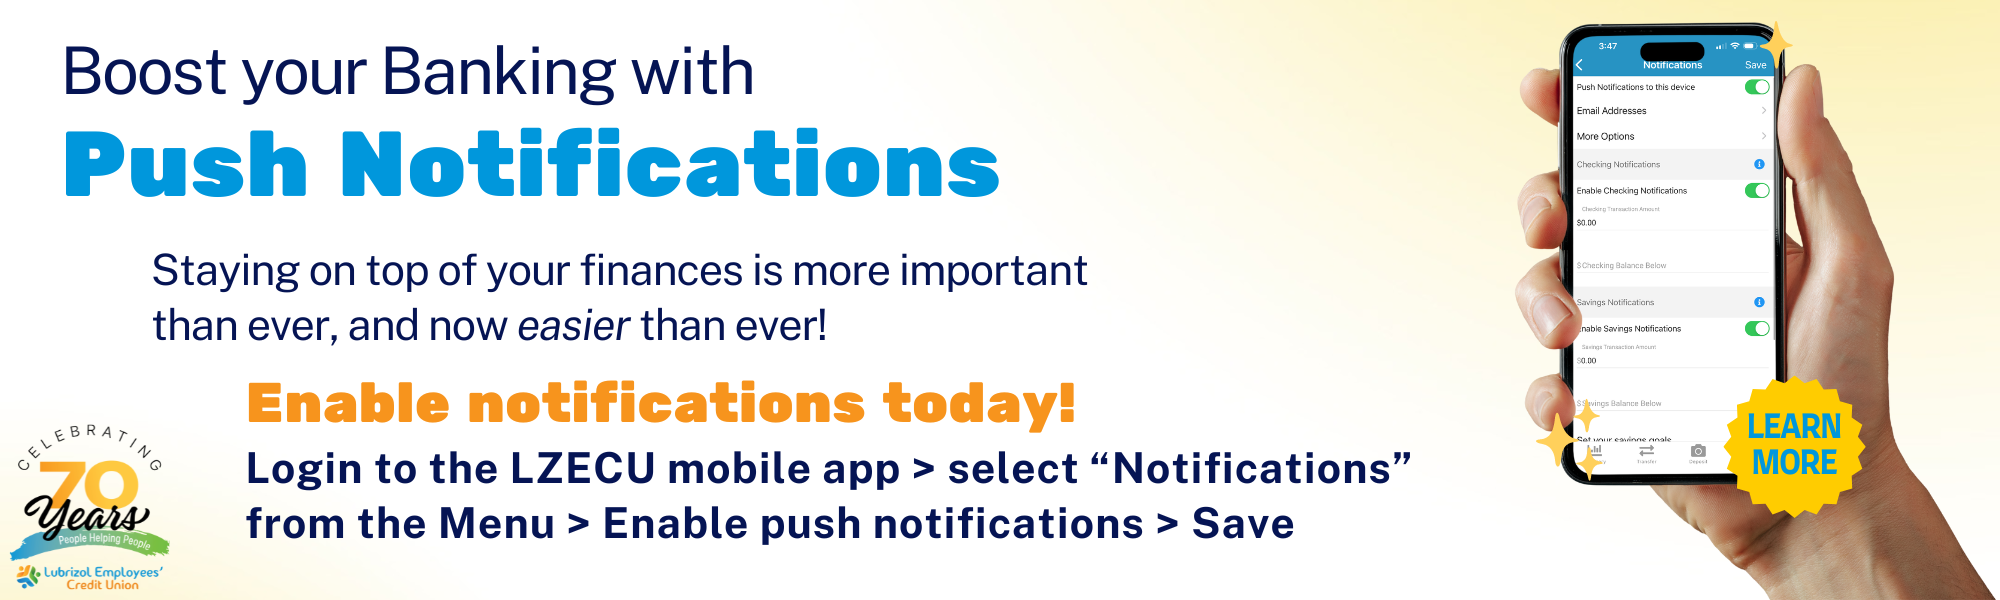 Turn on Push Notifications today!